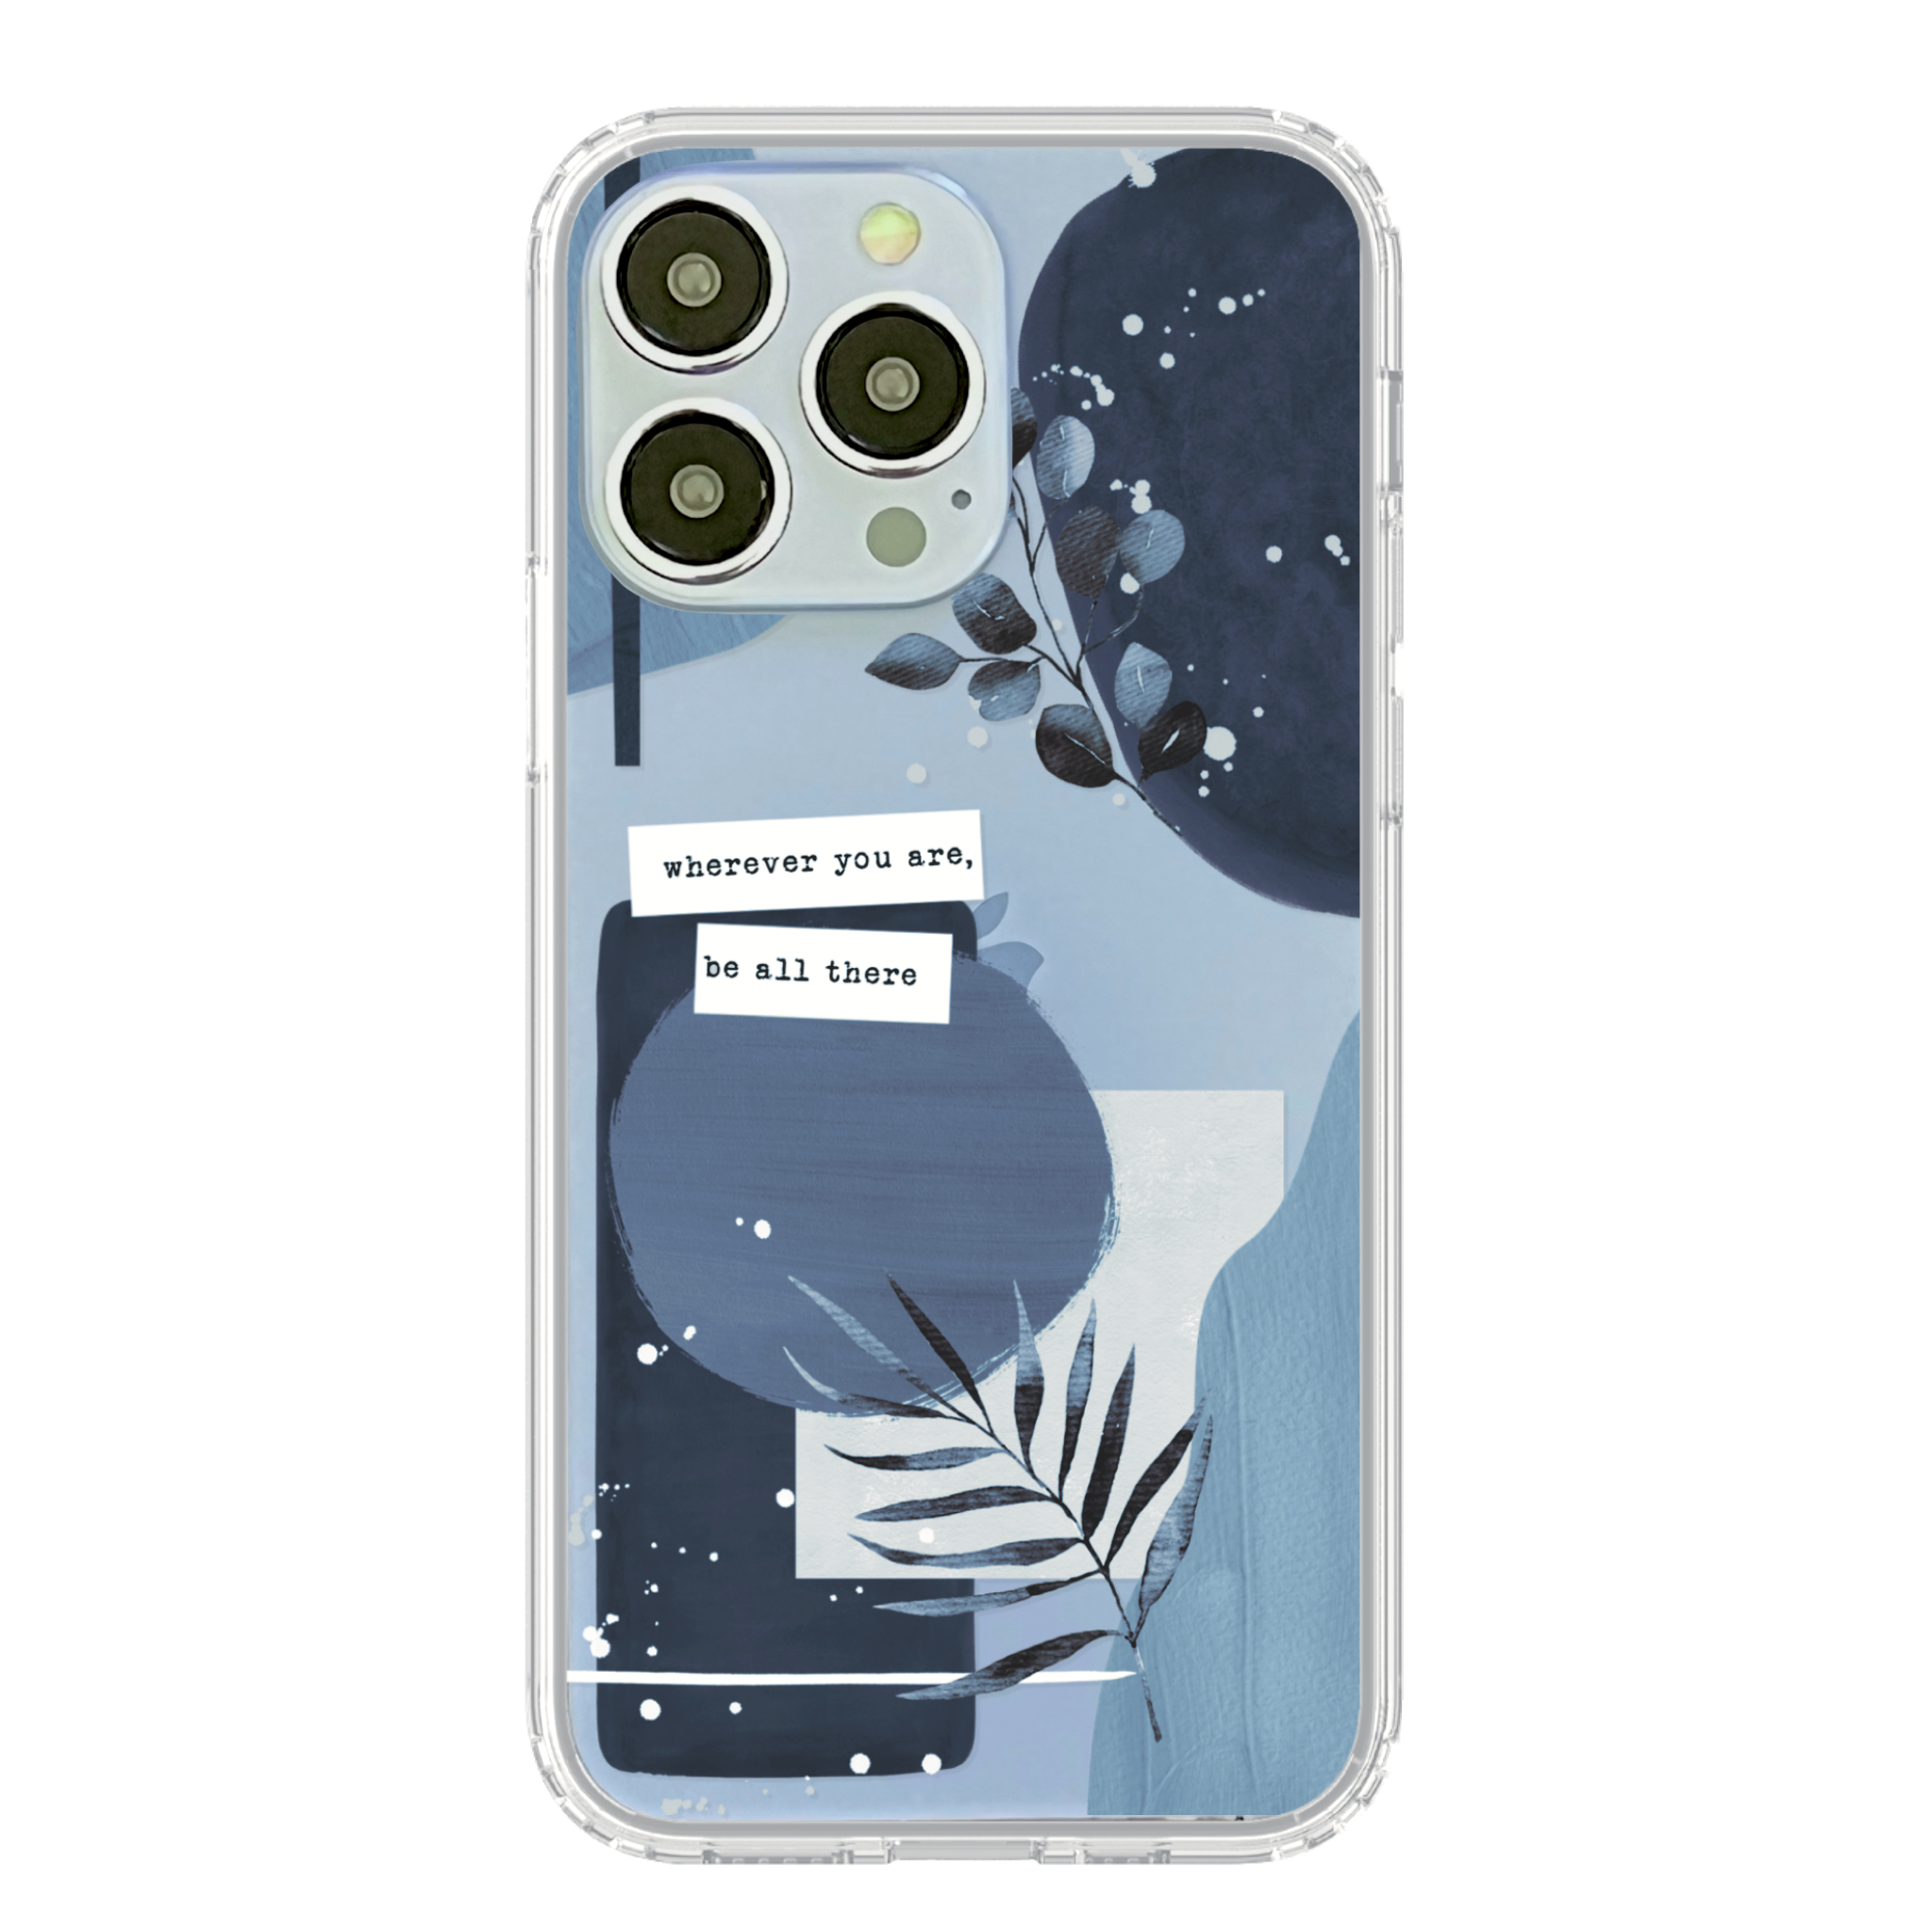 Cute Design Phone Cases For Your Sierra Blue iPhone 13 Pro & 13 Pro Max